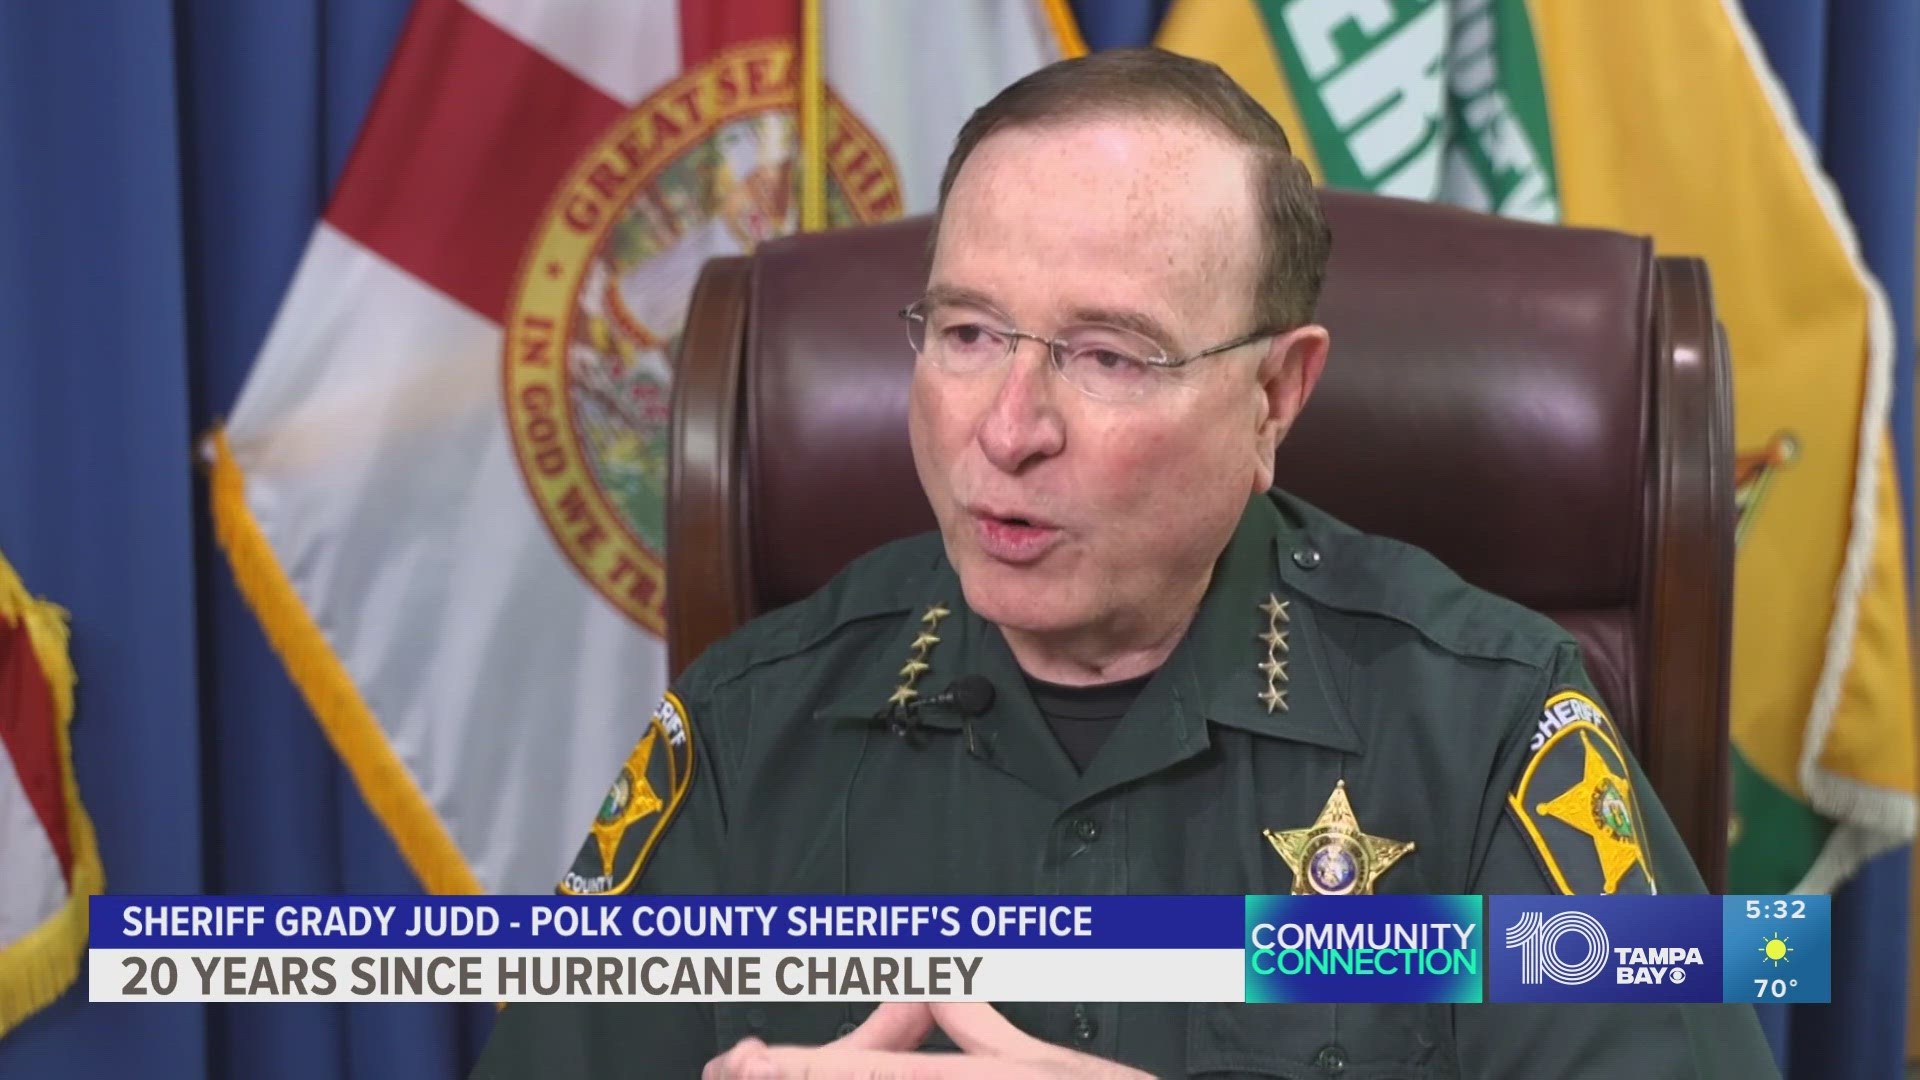 Now, 20 years later, emergency responders feel confident they can respond to a hurricane the strength of Charley in 2004 with the lessons learned.